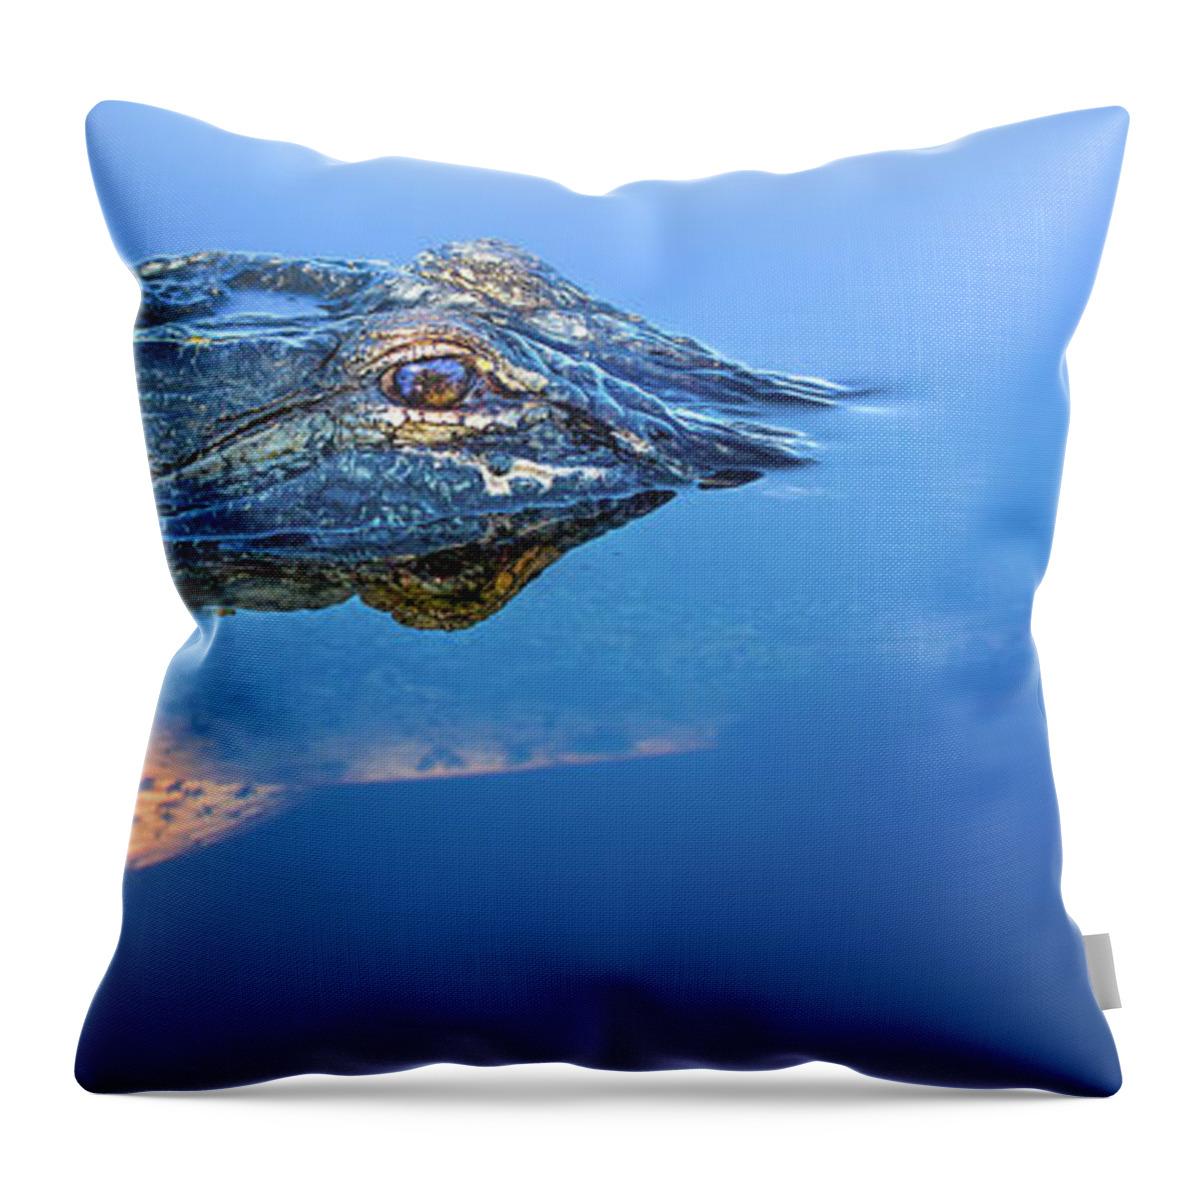 Alligator Panorama Throw Pillow featuring the photograph Alligator Panorama by Mark Andrew Thomas